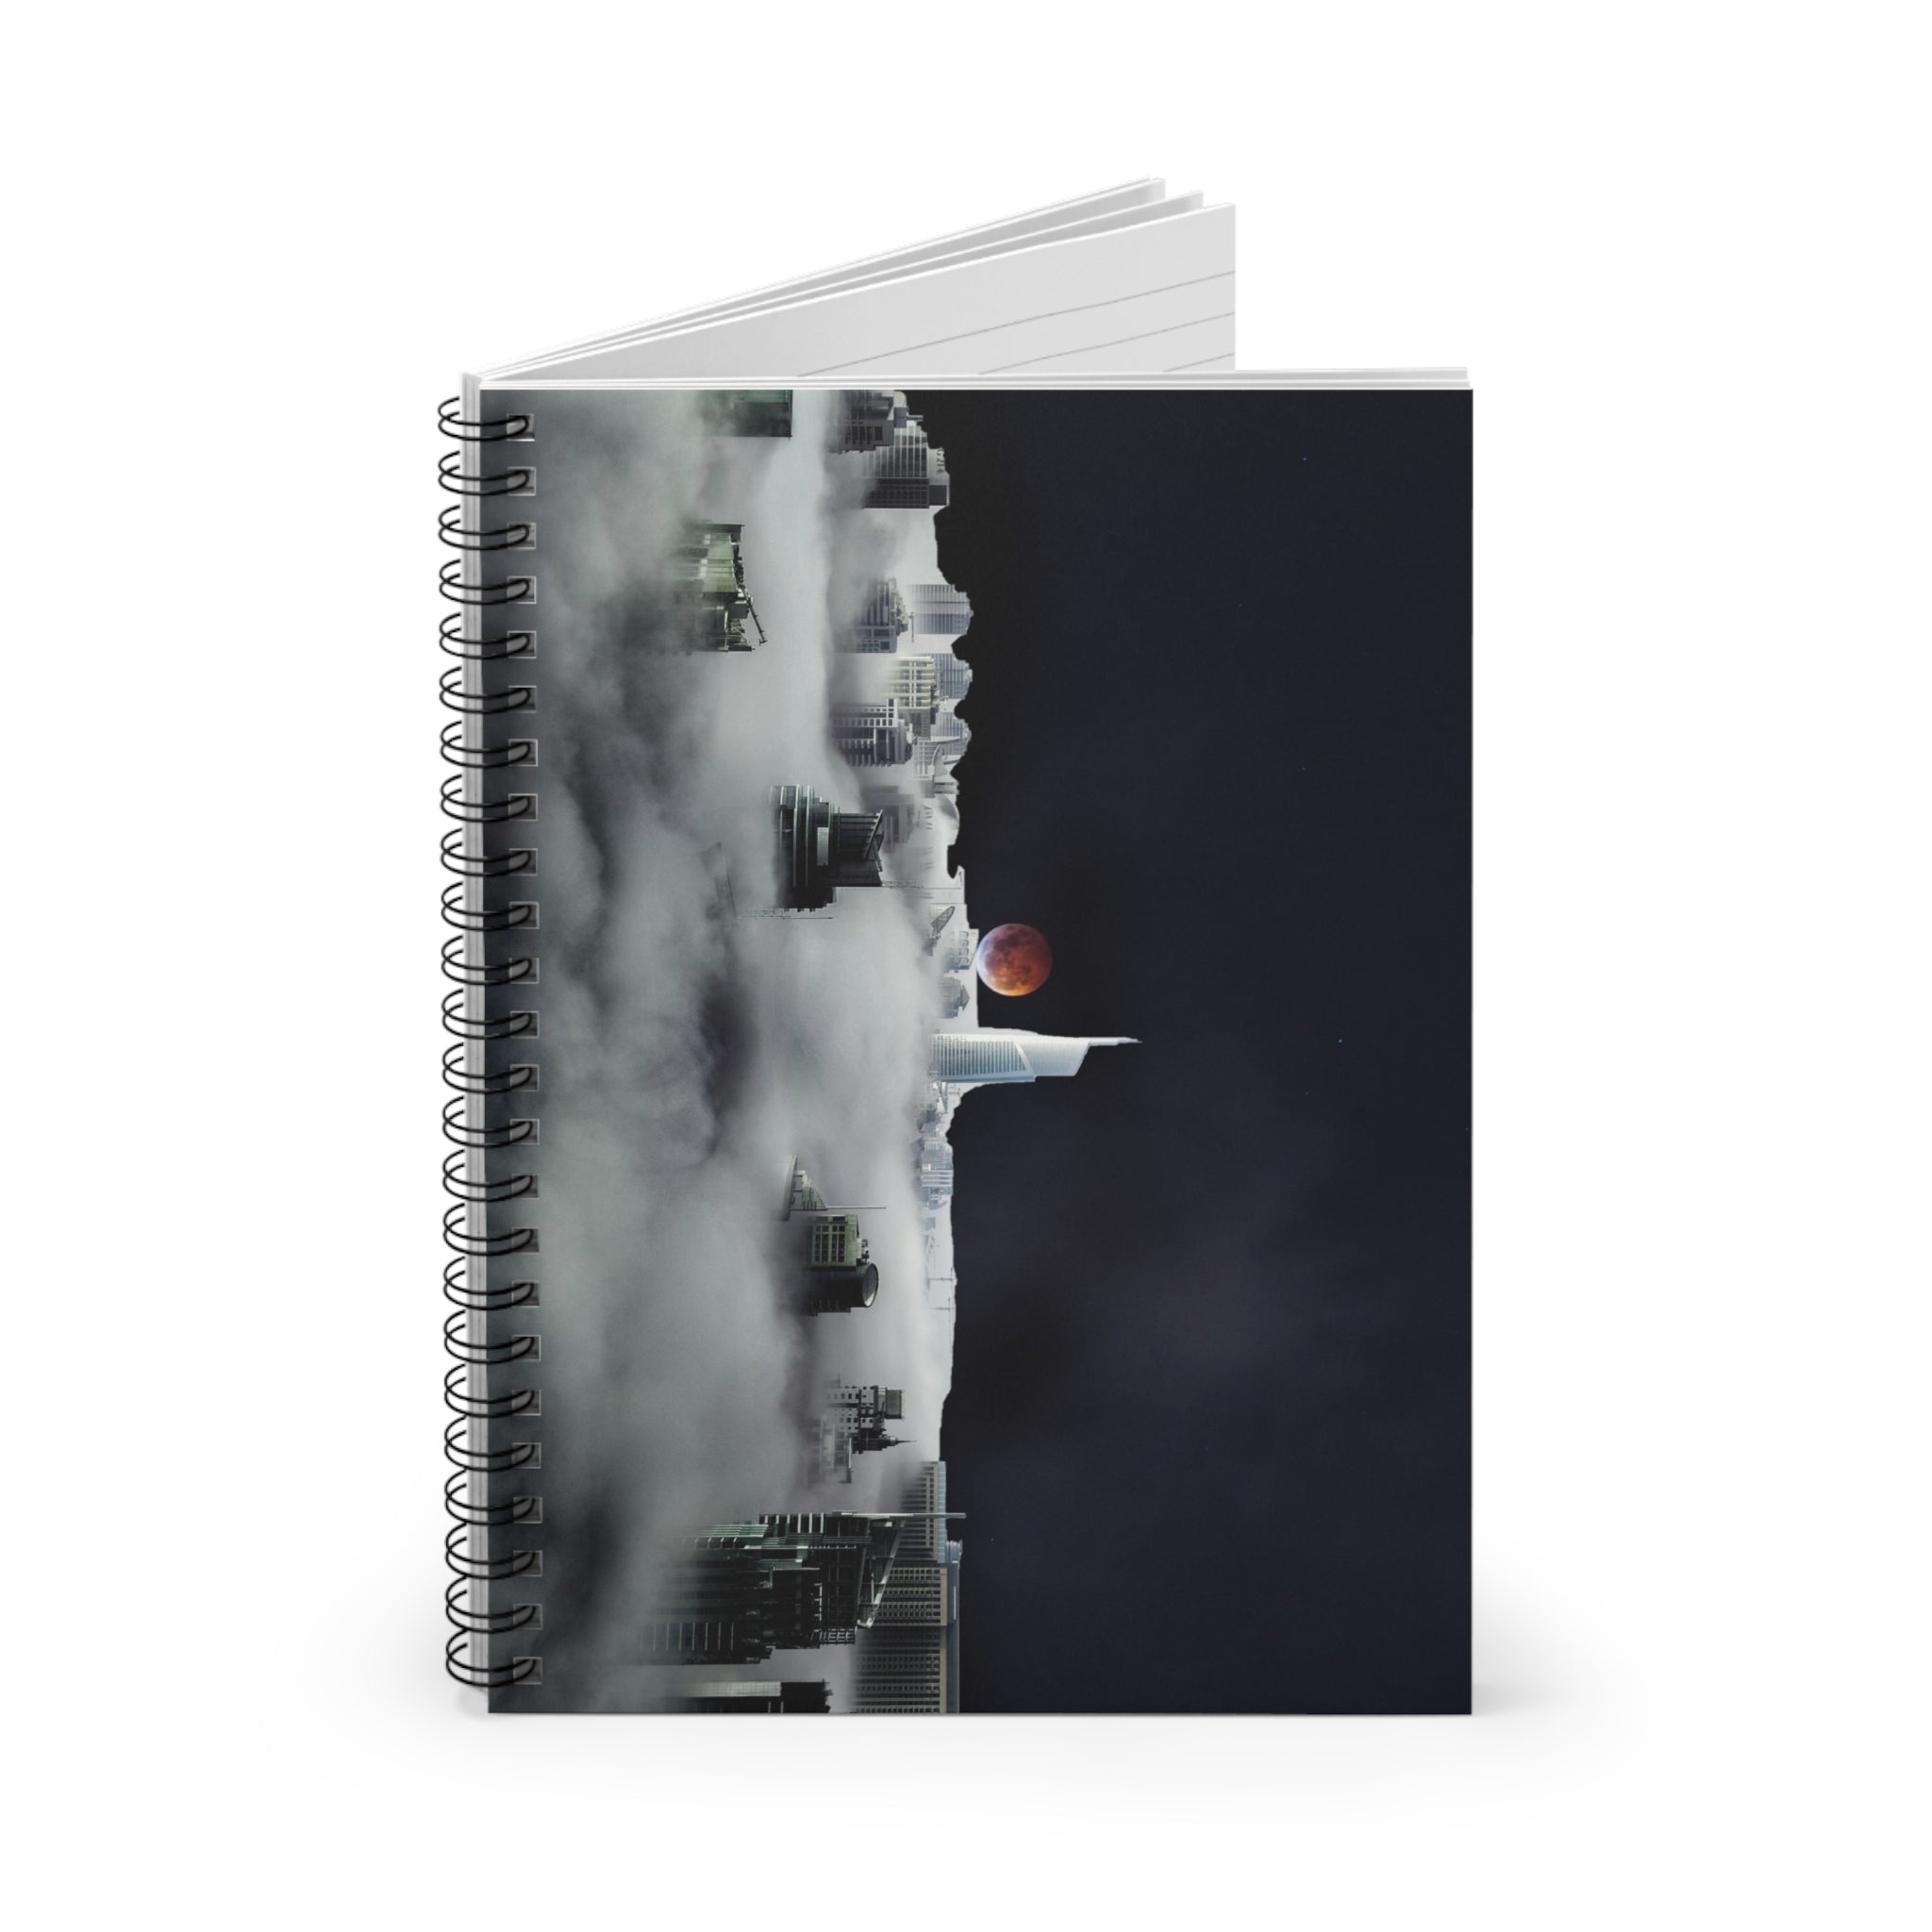 Dystopia Spiral Notebook - Ruled Line